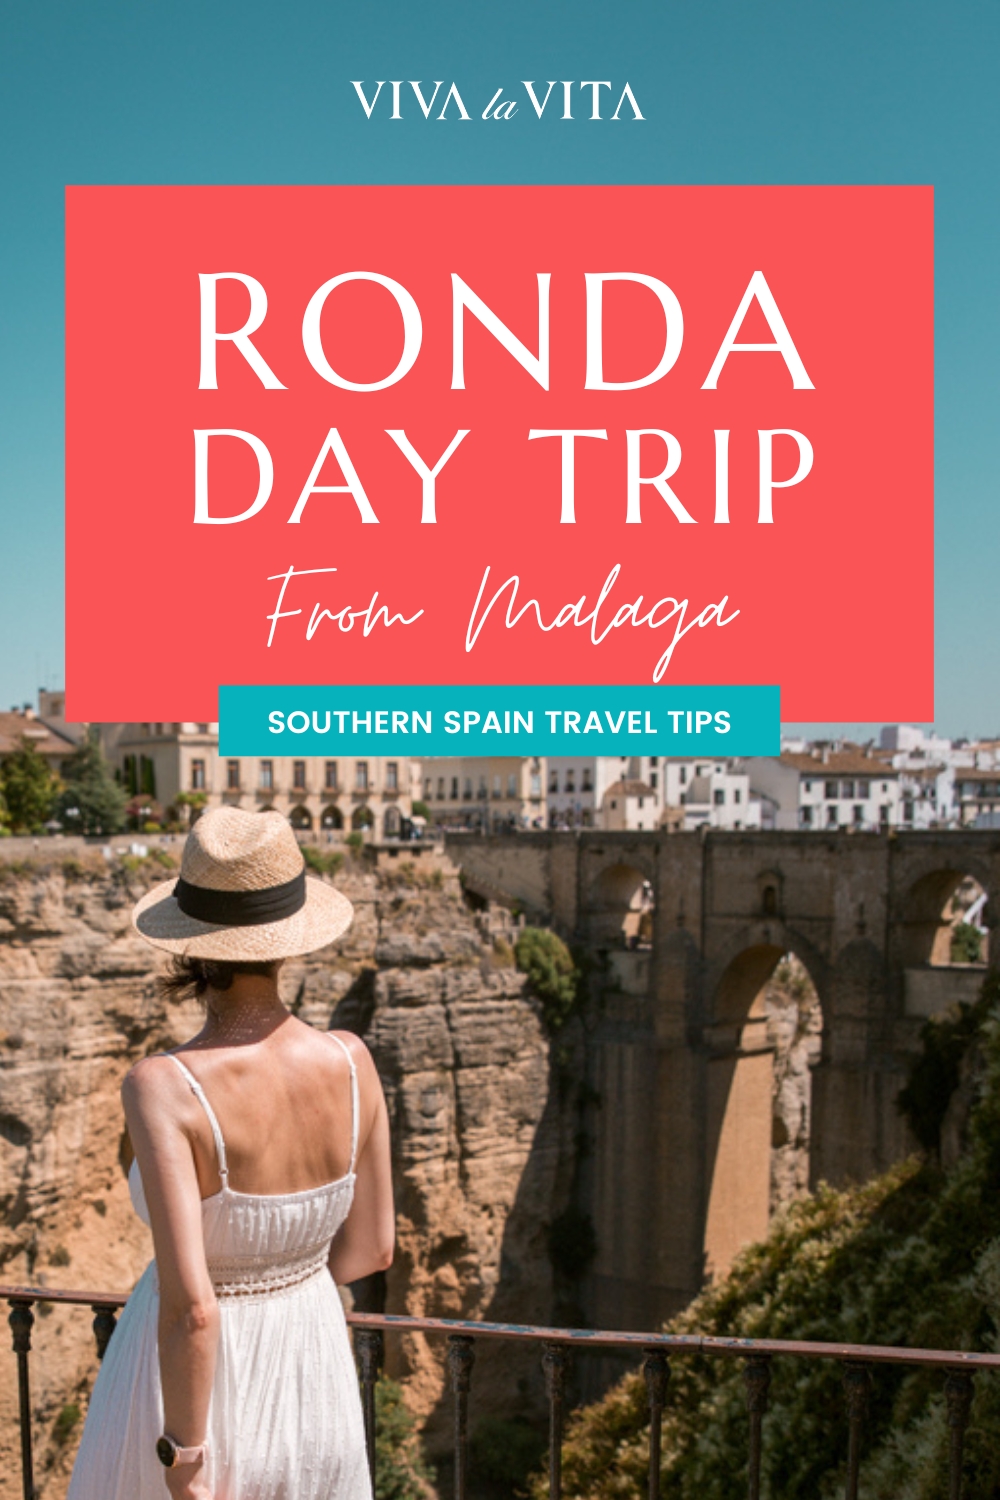 day trip from Malaga to Ronda - complete guide